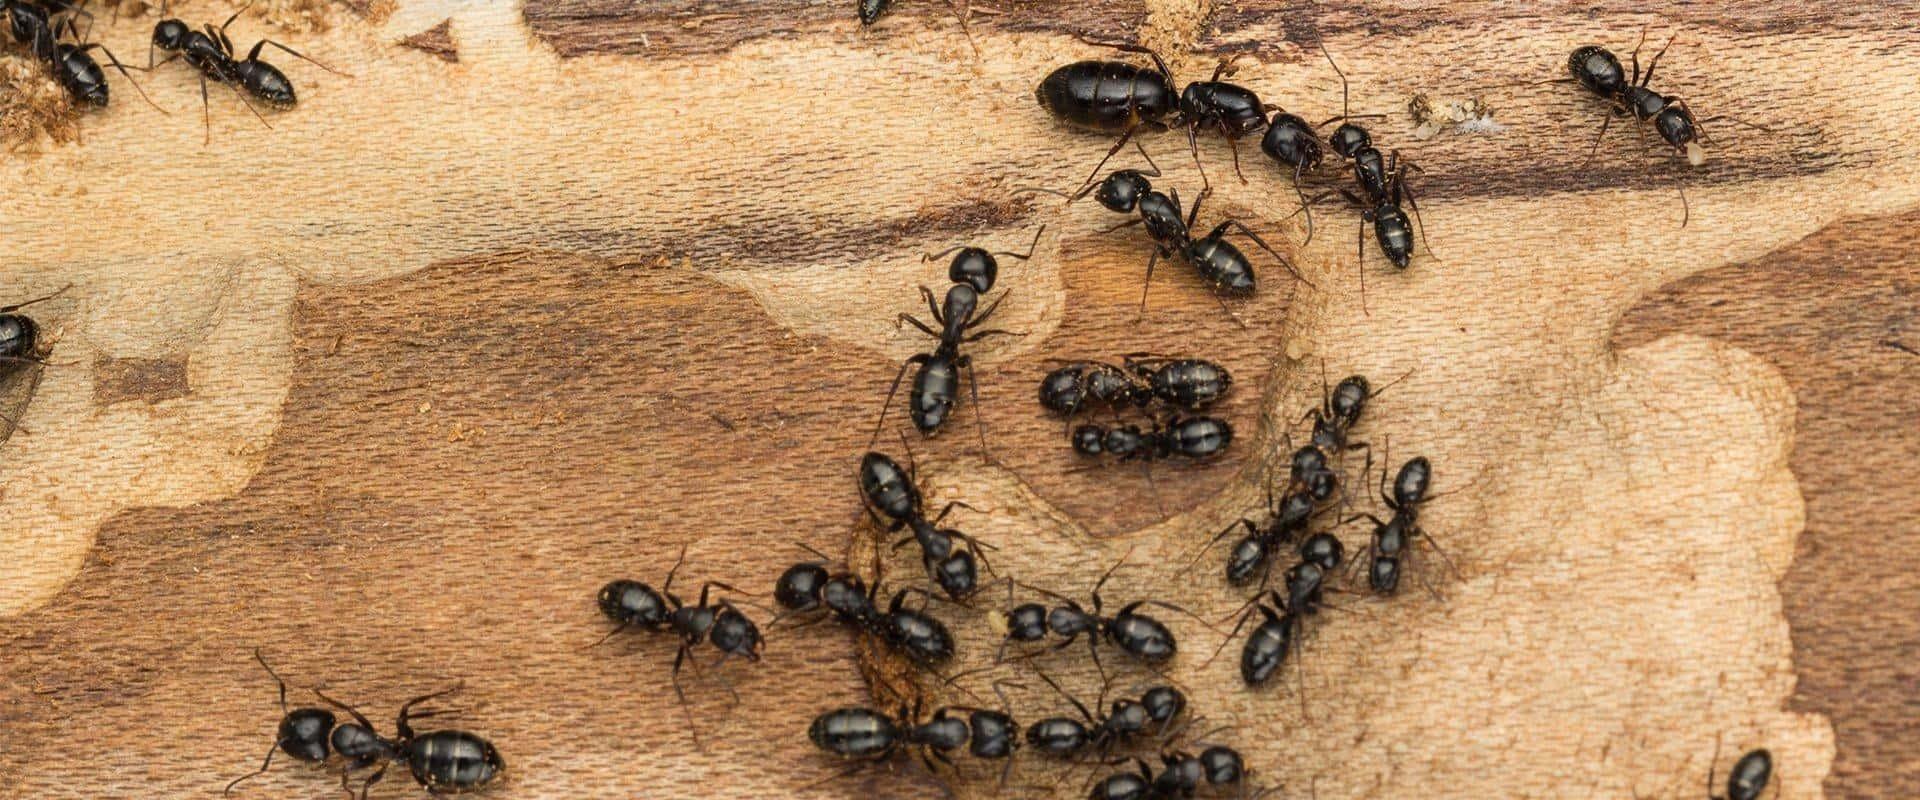 carpenter ants crawling around on wood they have damaged